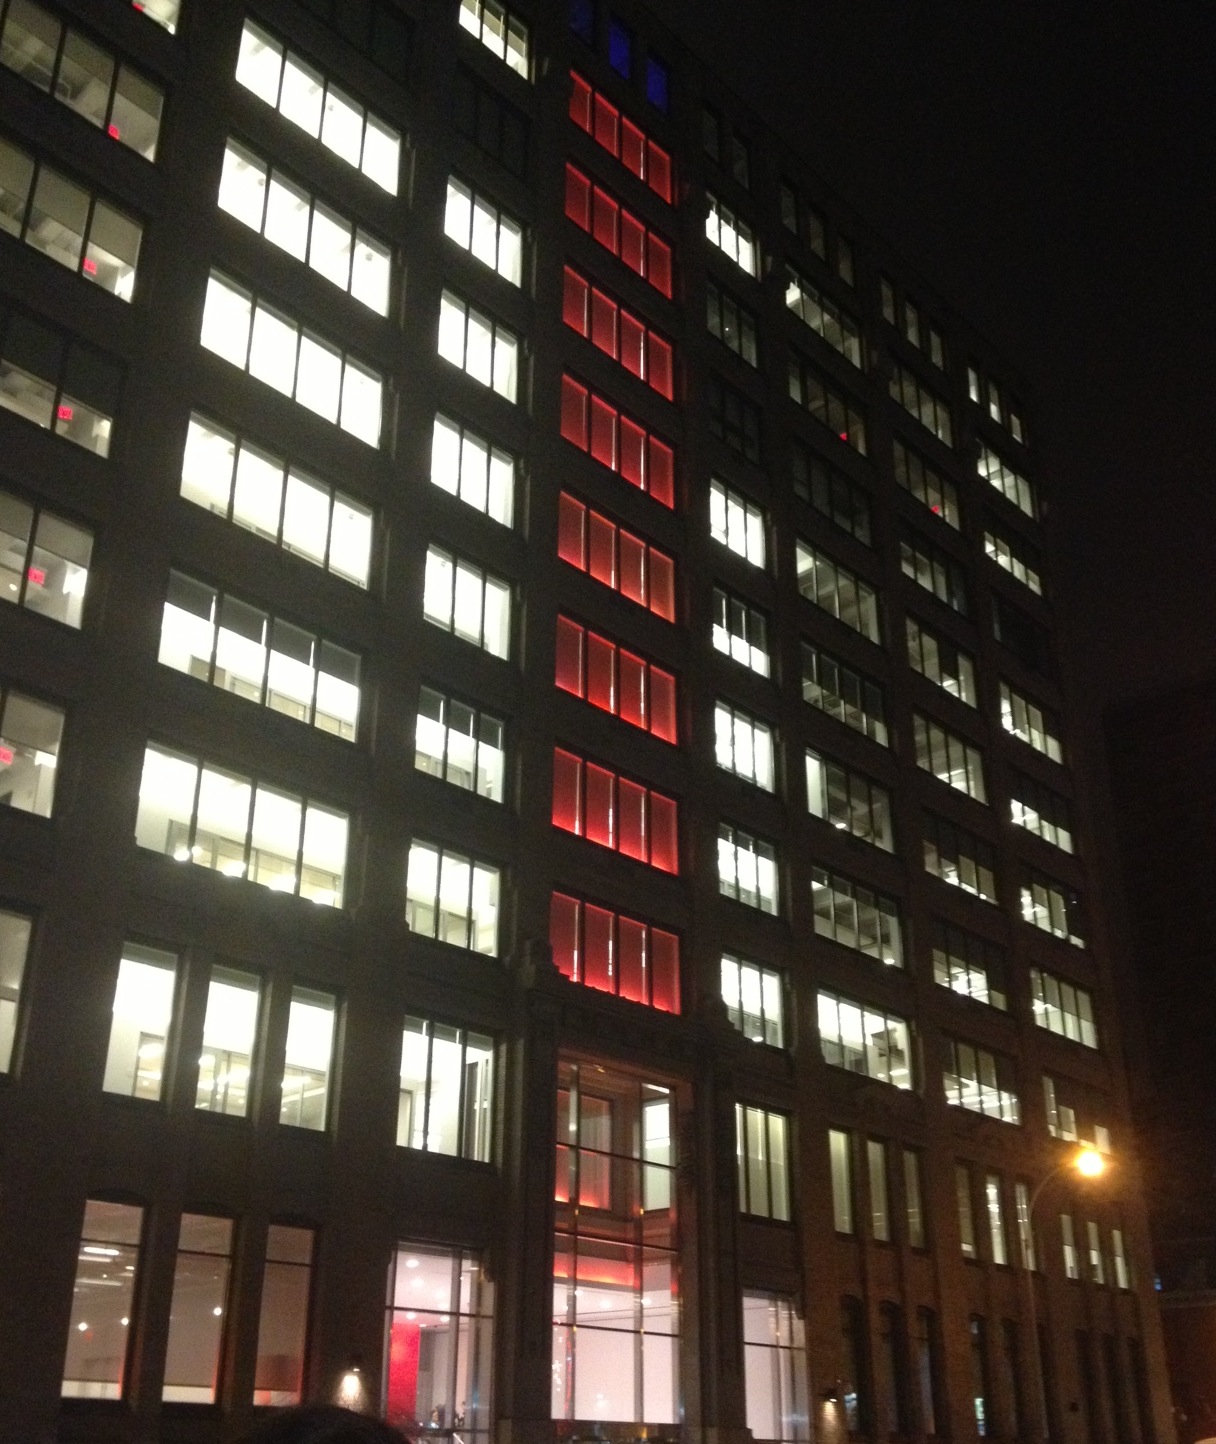 A nightly photo of an illuminated building with white lights and the middle of it is illuminated by red lights.